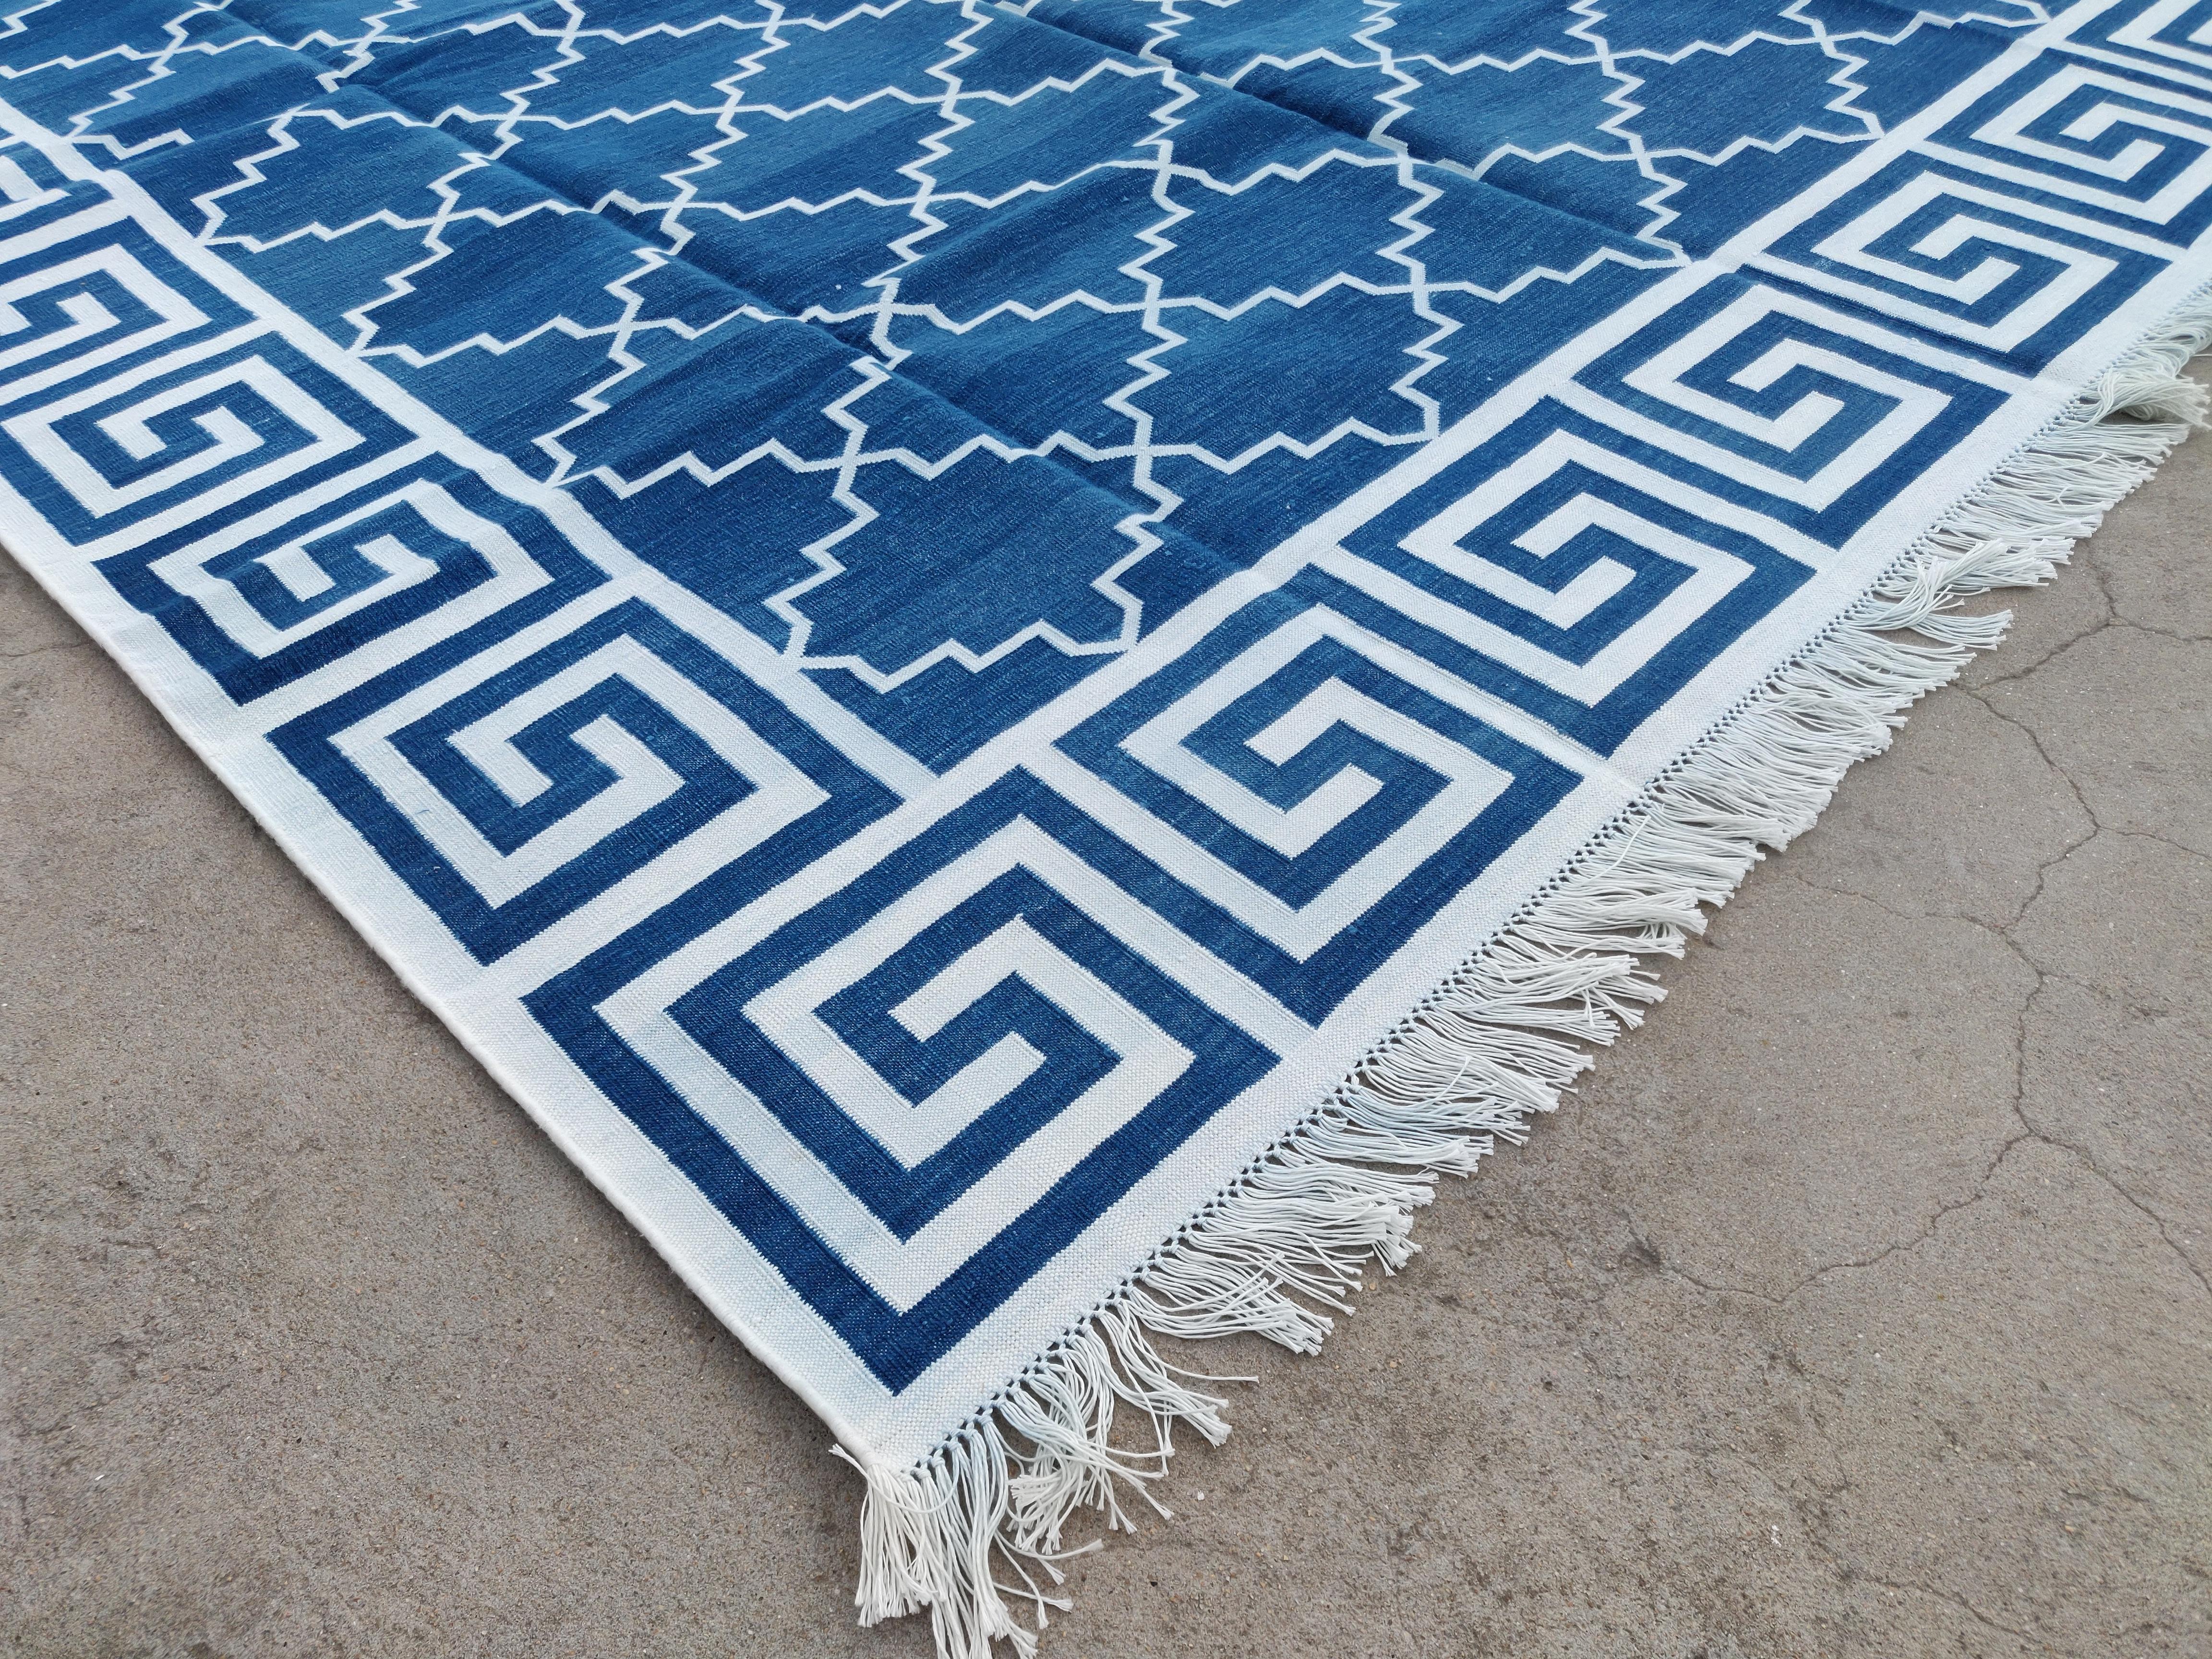 Hand-Woven Handmade Cotton Area Flat Weave Rug, 6x9 Blue And White Geometric Indian Dhurrie For Sale